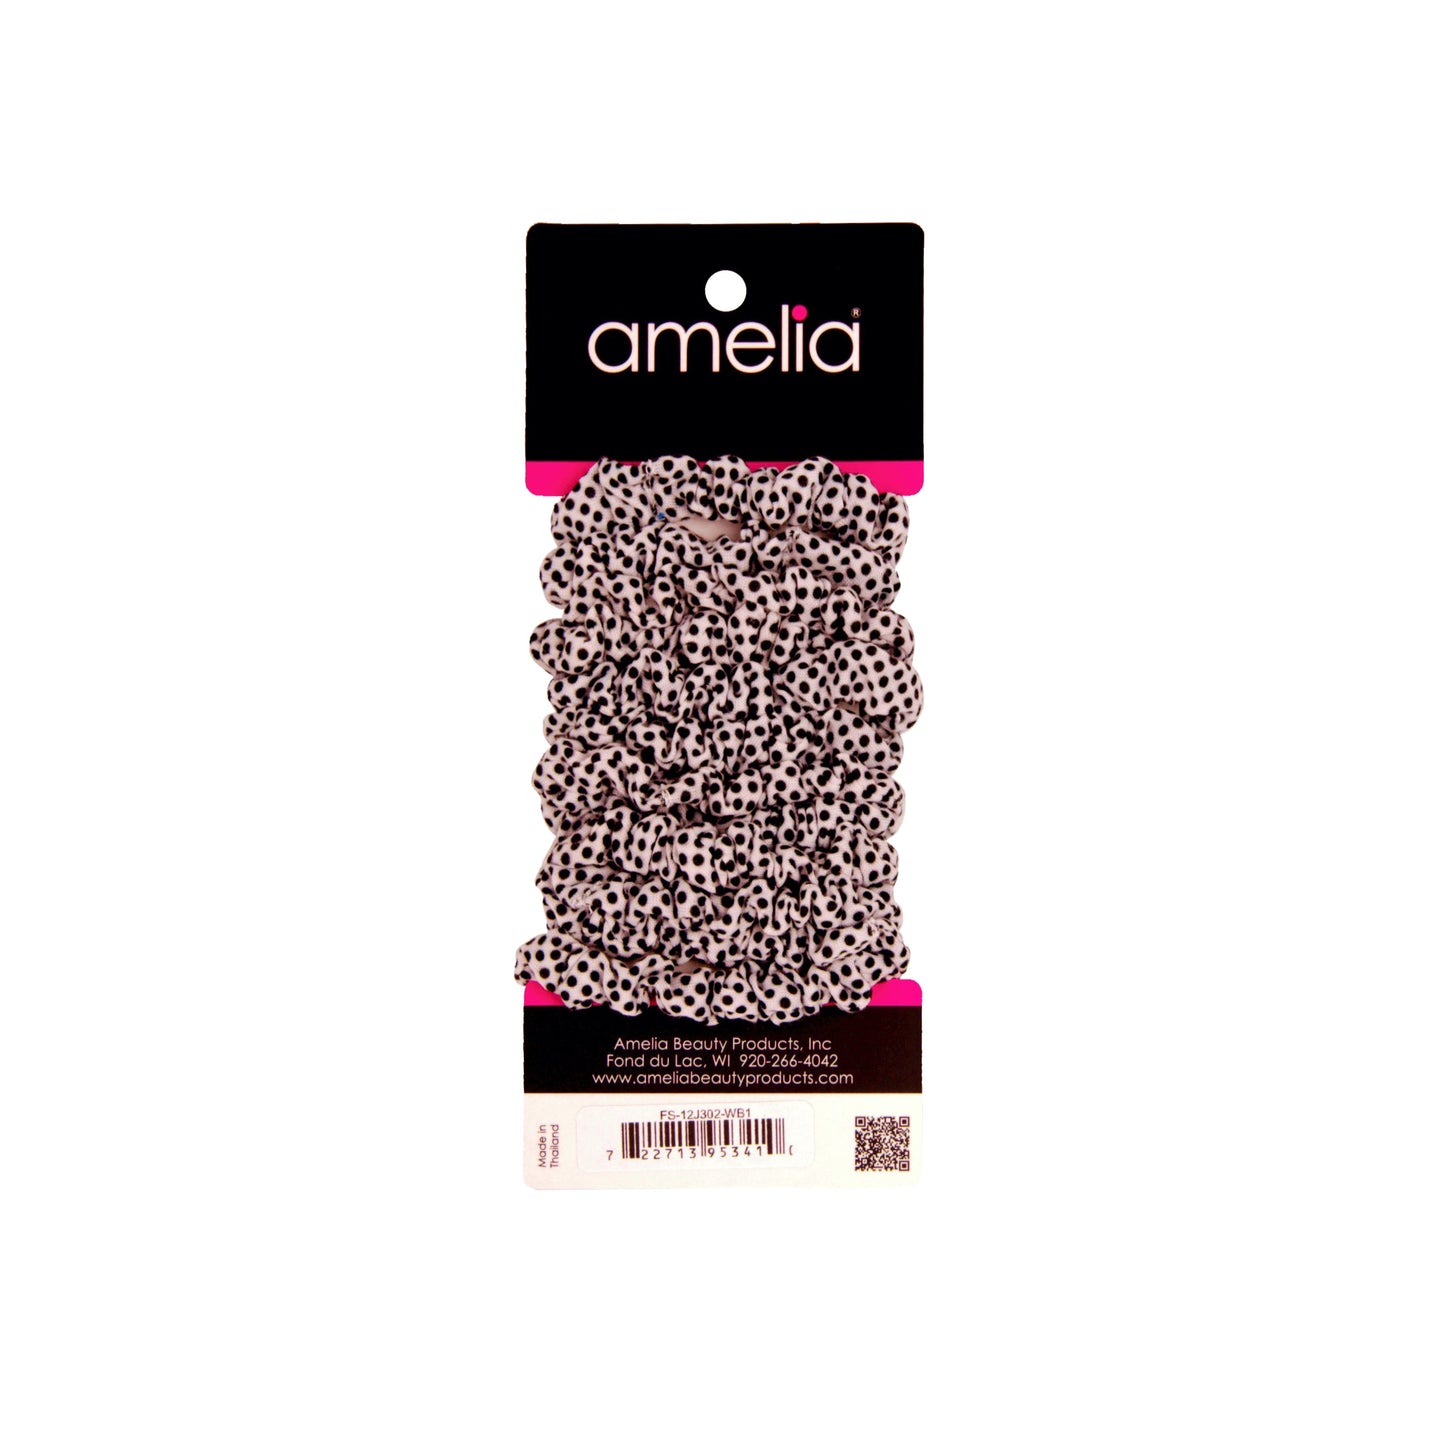 Amelia Beauty, White/Black Stripe Jersey Scrunchies, 2.25in Diameter, Gentle on Hair, Strong Hold, No Snag, No Dents or Creases. 12 Pack - 12 Retail Packs